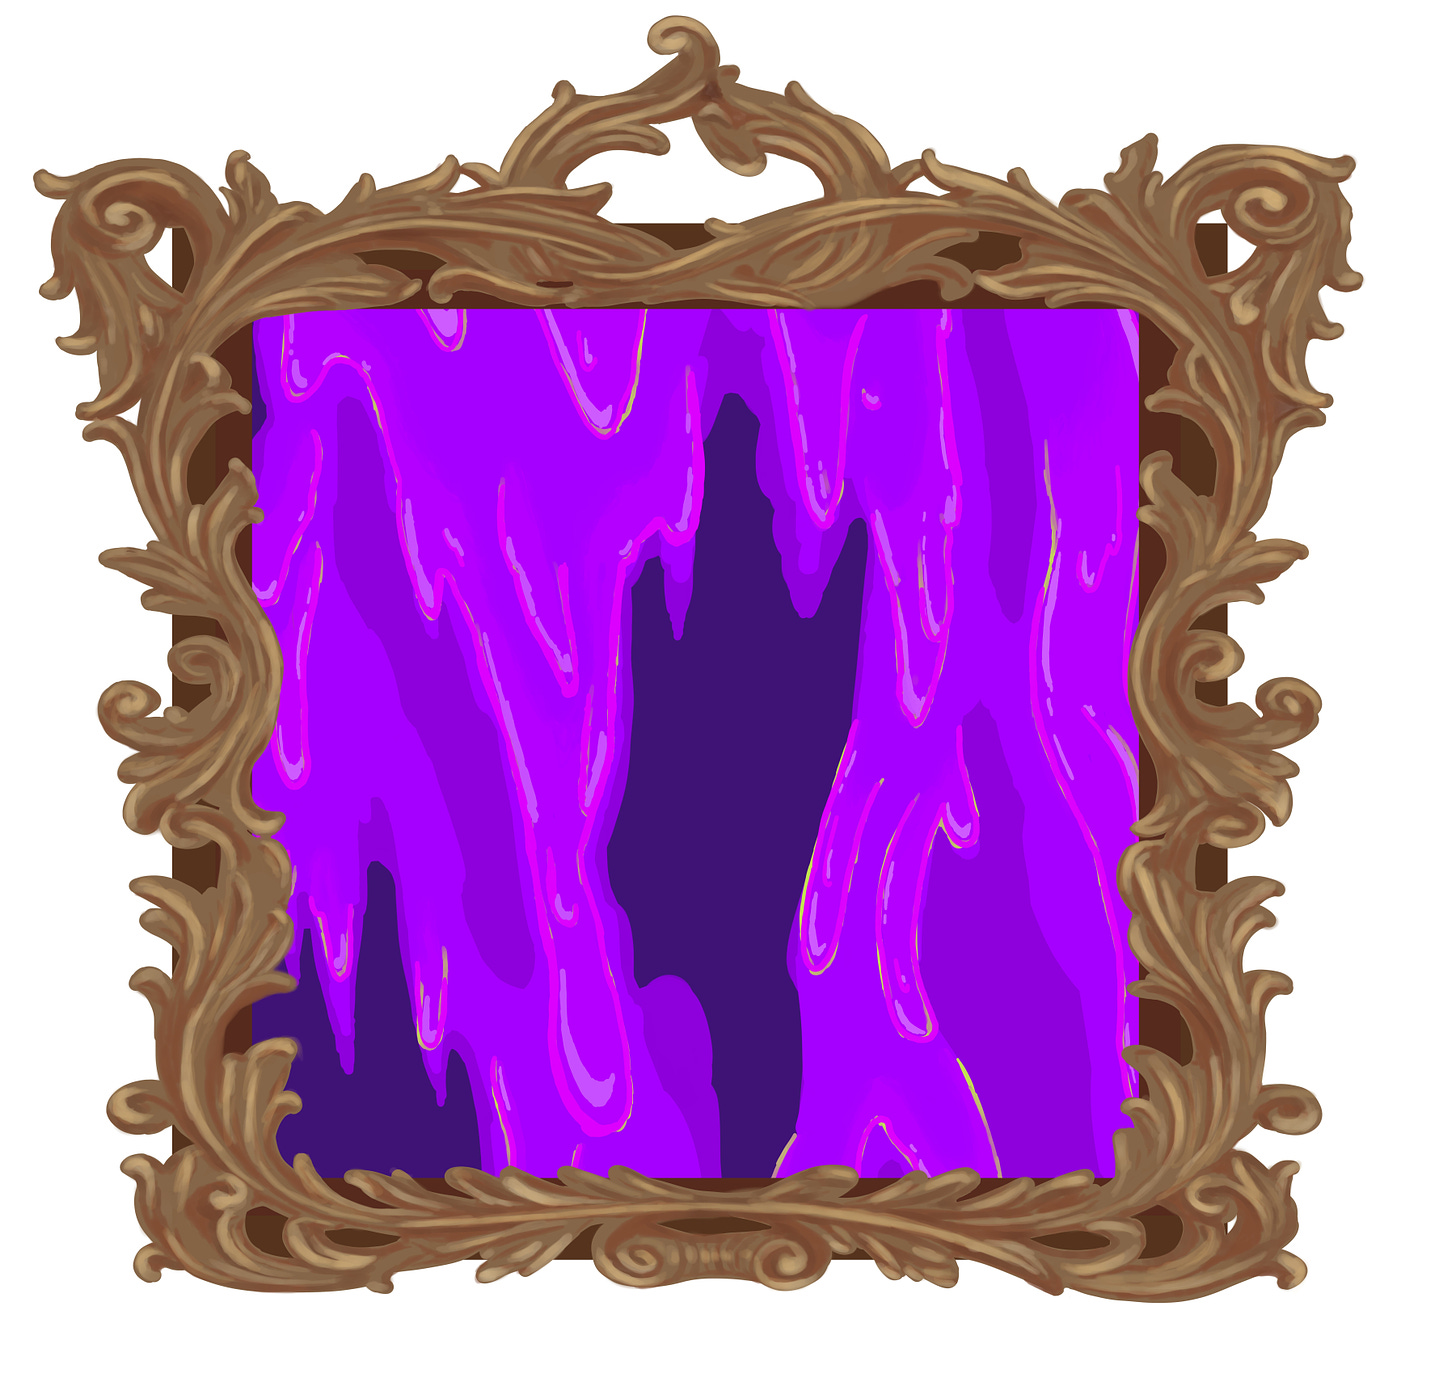 A frame with a gooey purple substance in the middle